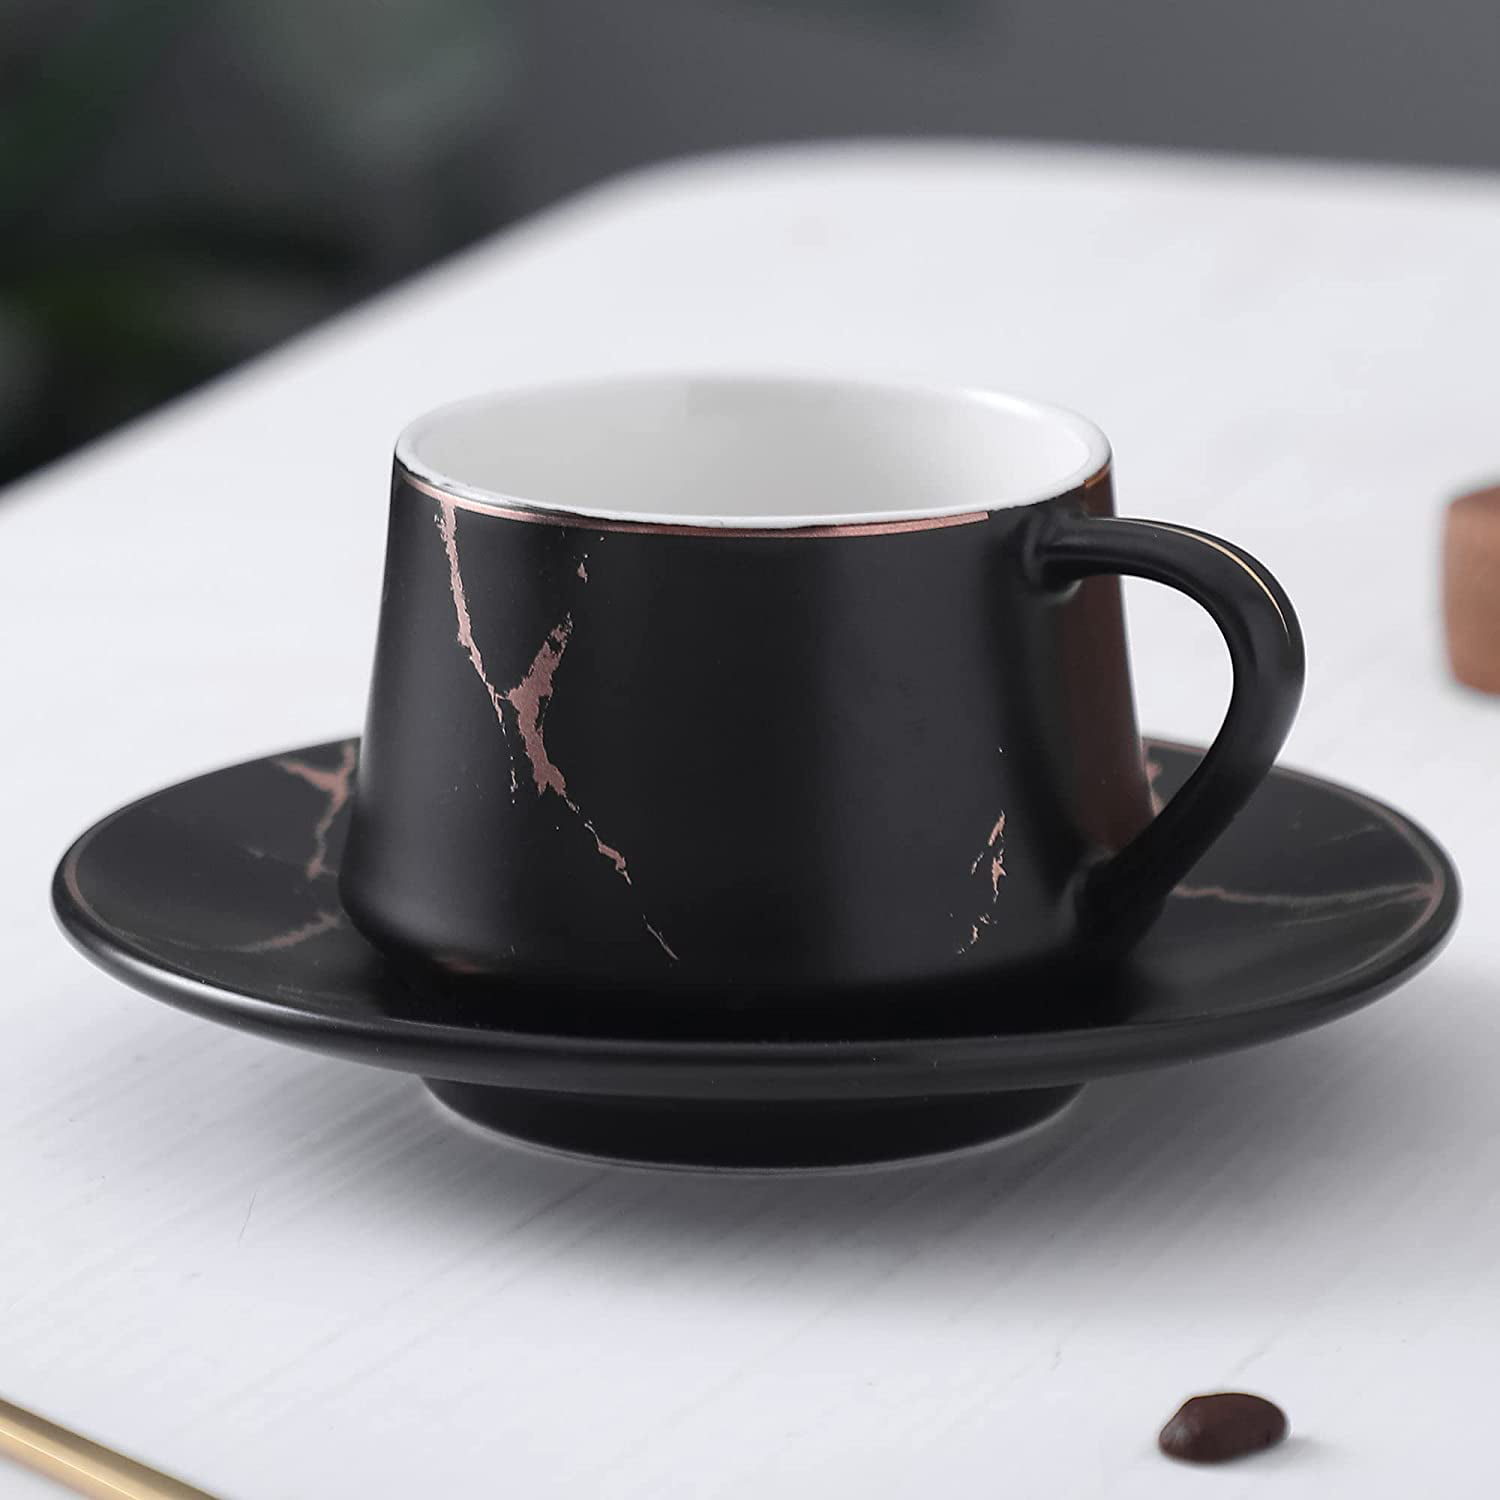 Modern Tea Cup Set DANSHER Ceramic Coffee Cups with Saucers 4 Ounce Gold Marble Pattern Porcelain Coffee Mugs Set Black Set of 6 Small Espresso Cups